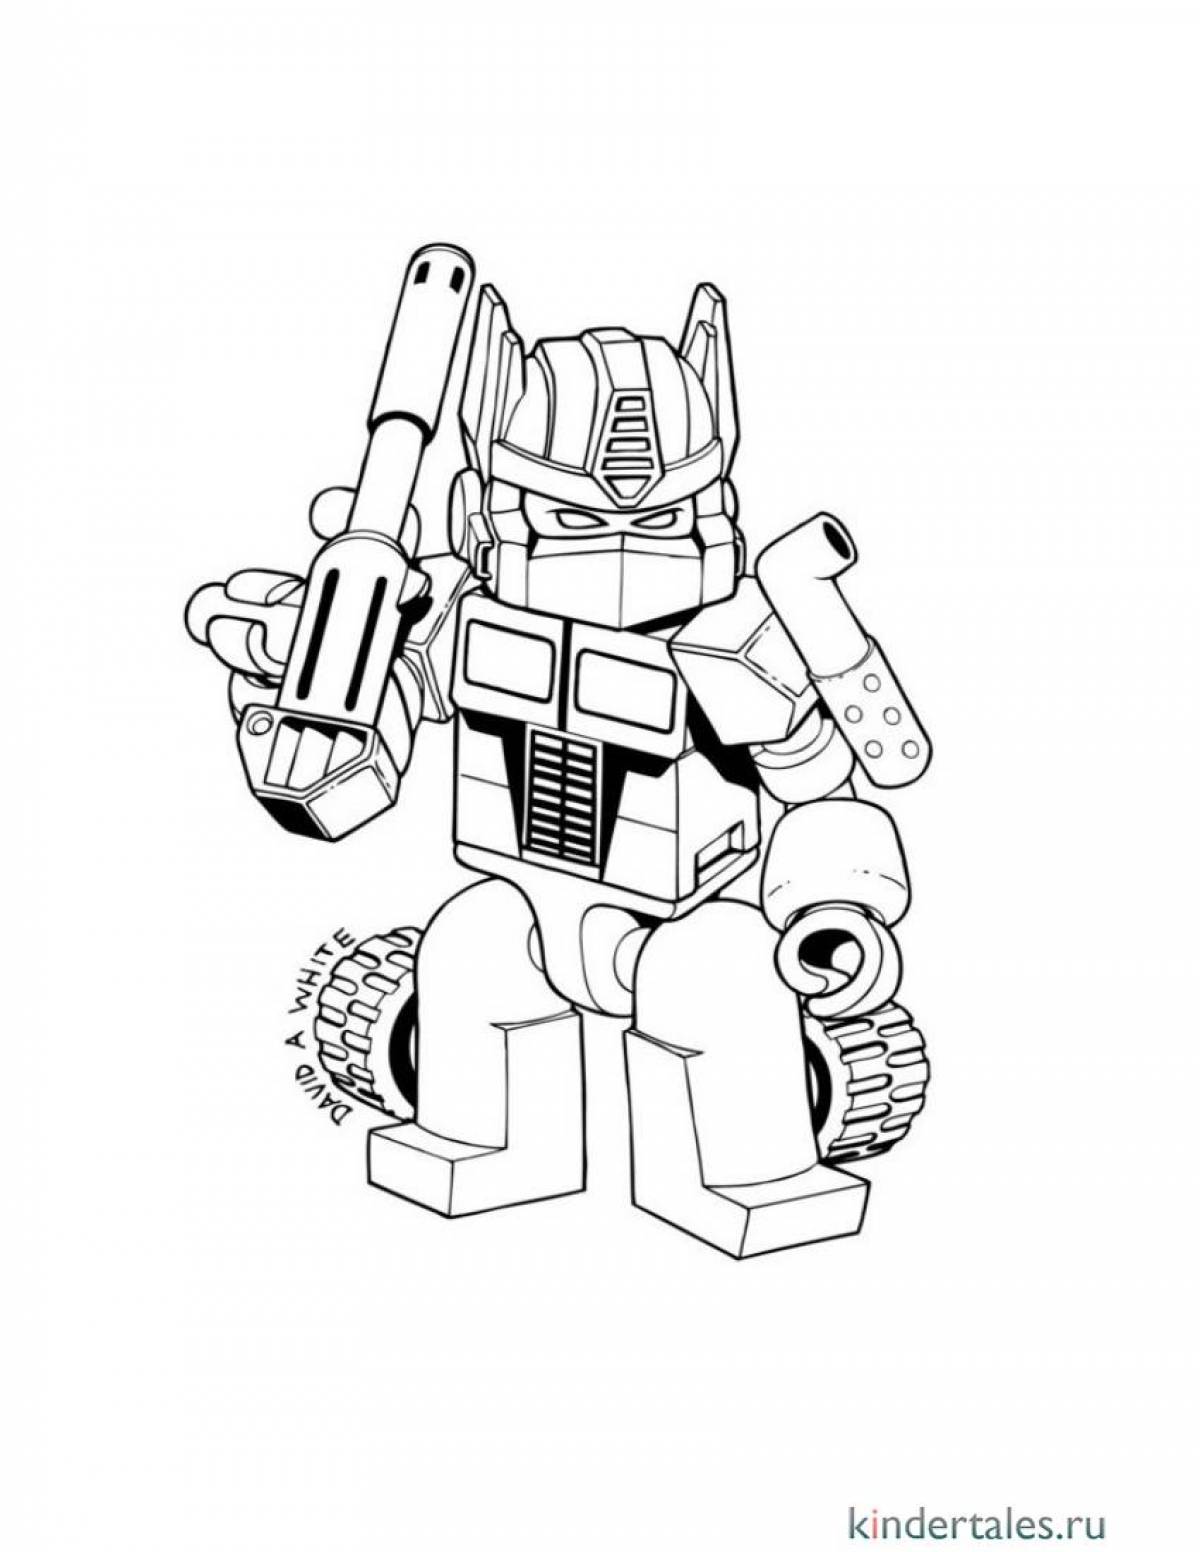 Glitter Transforming Robot Coloring Page